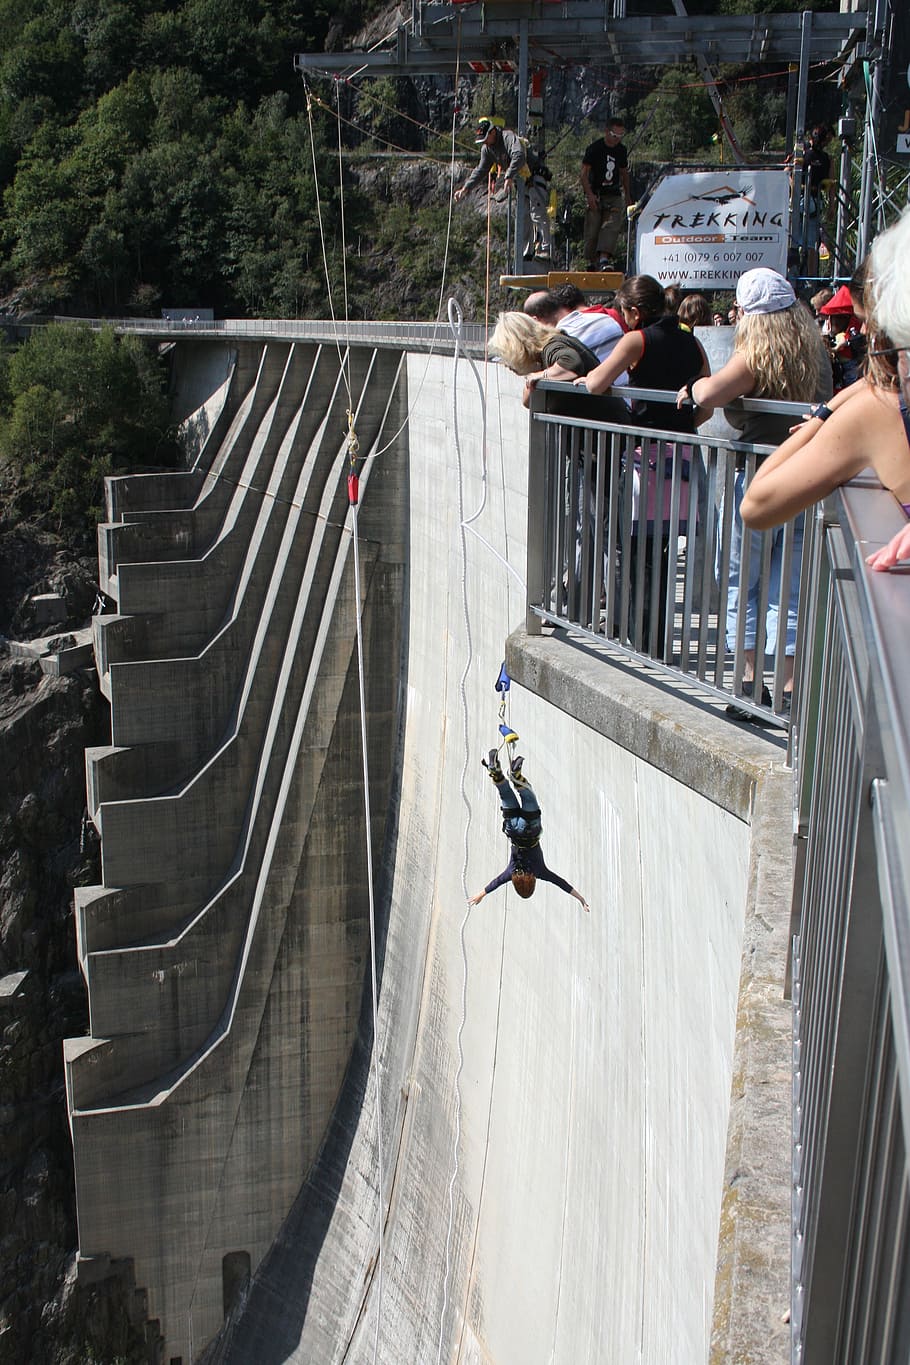 bungee jumping, dam, verzasca, ticino, switzerland, real people, architecture, men, staircase, railing